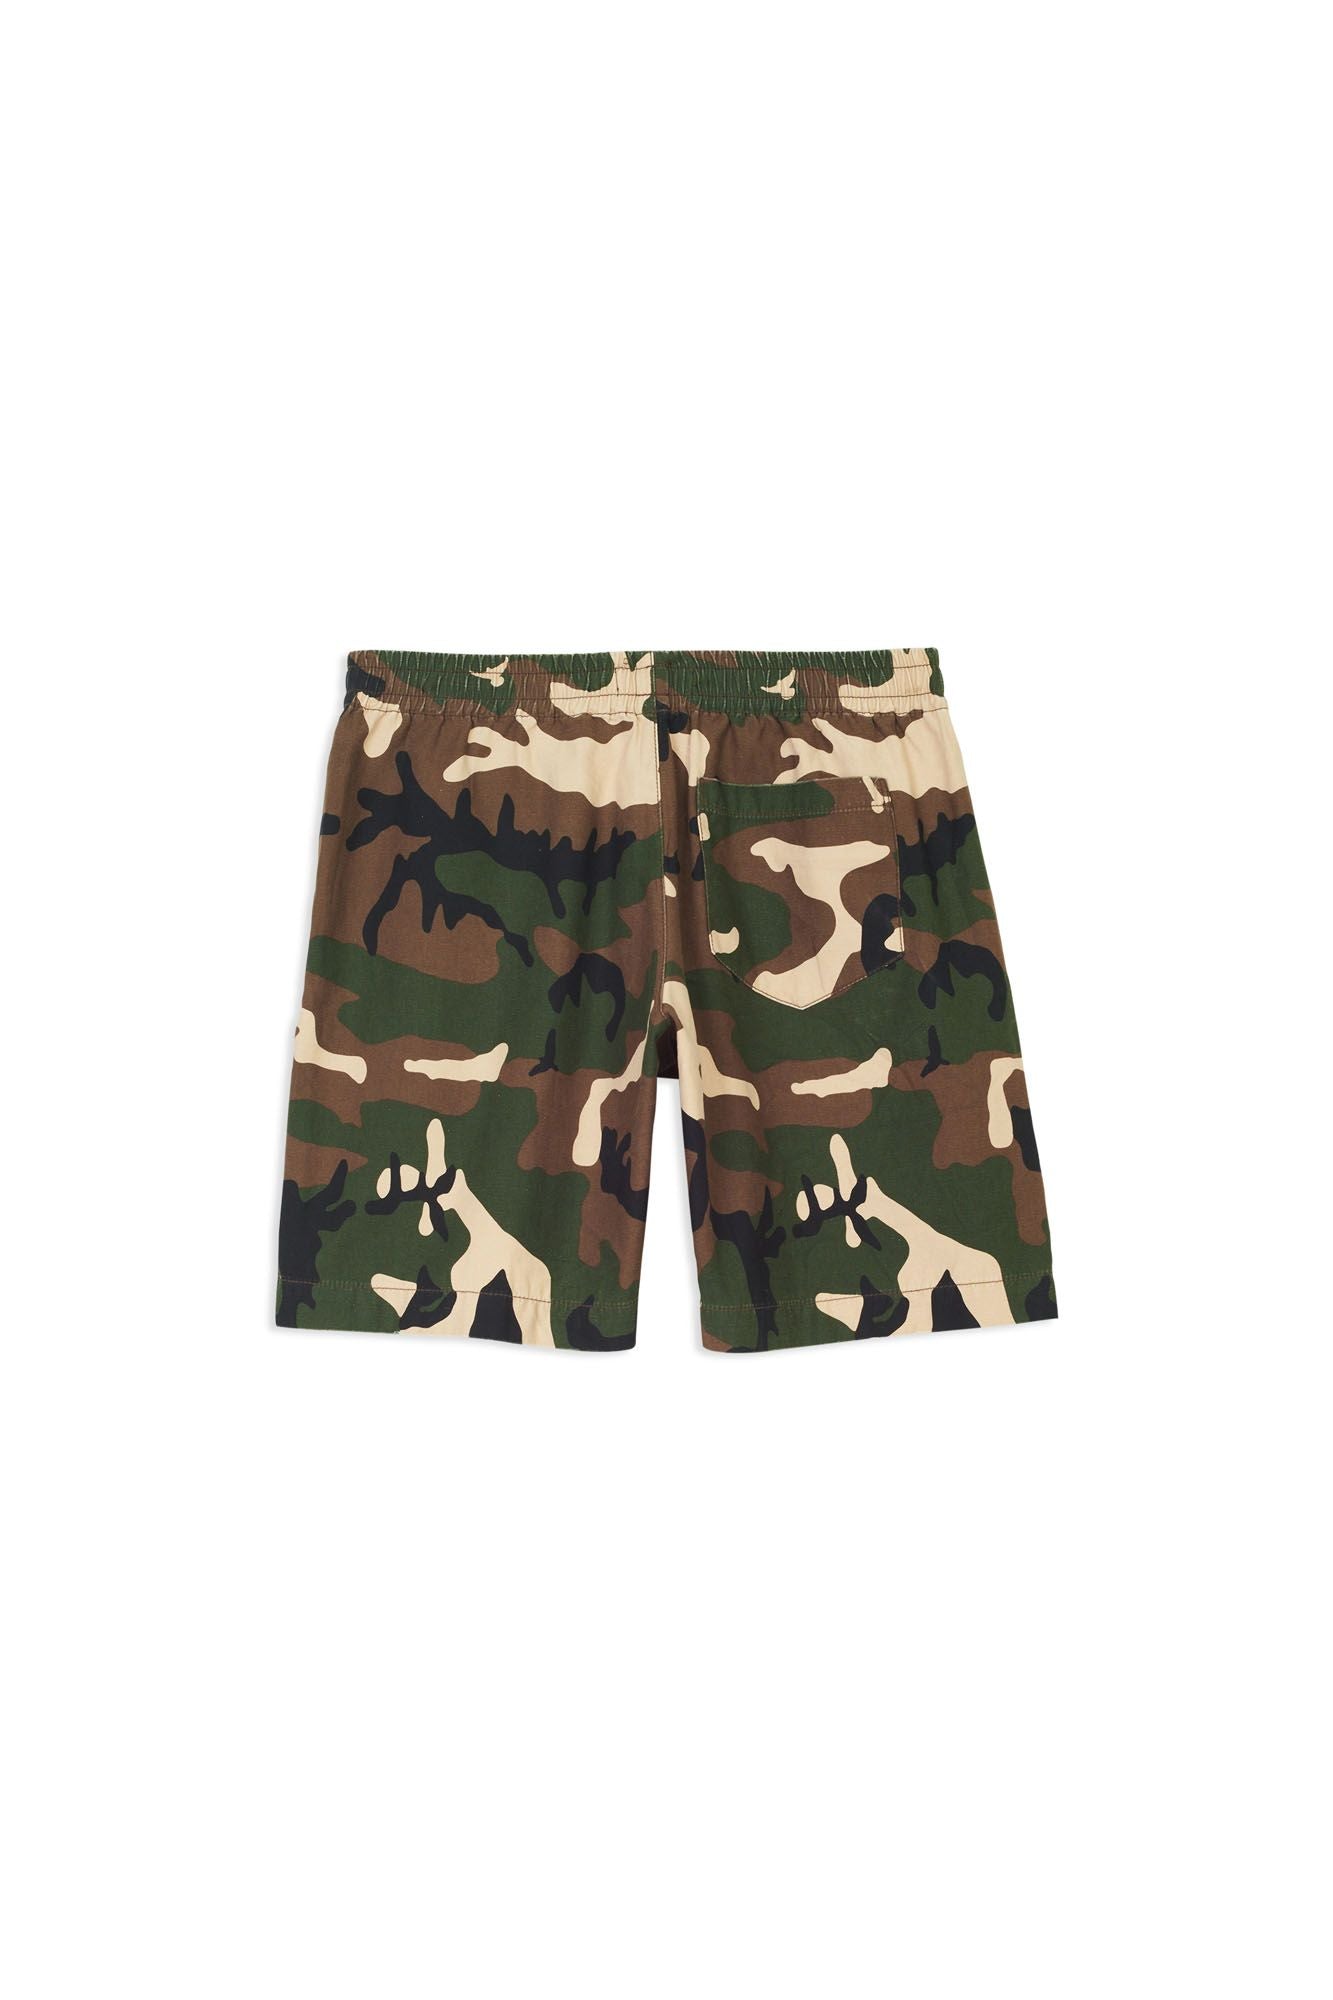 PURPLE BRAND - Men's Short - Style No. P025 - Exclusive Camo Short With Red Star Print - Back